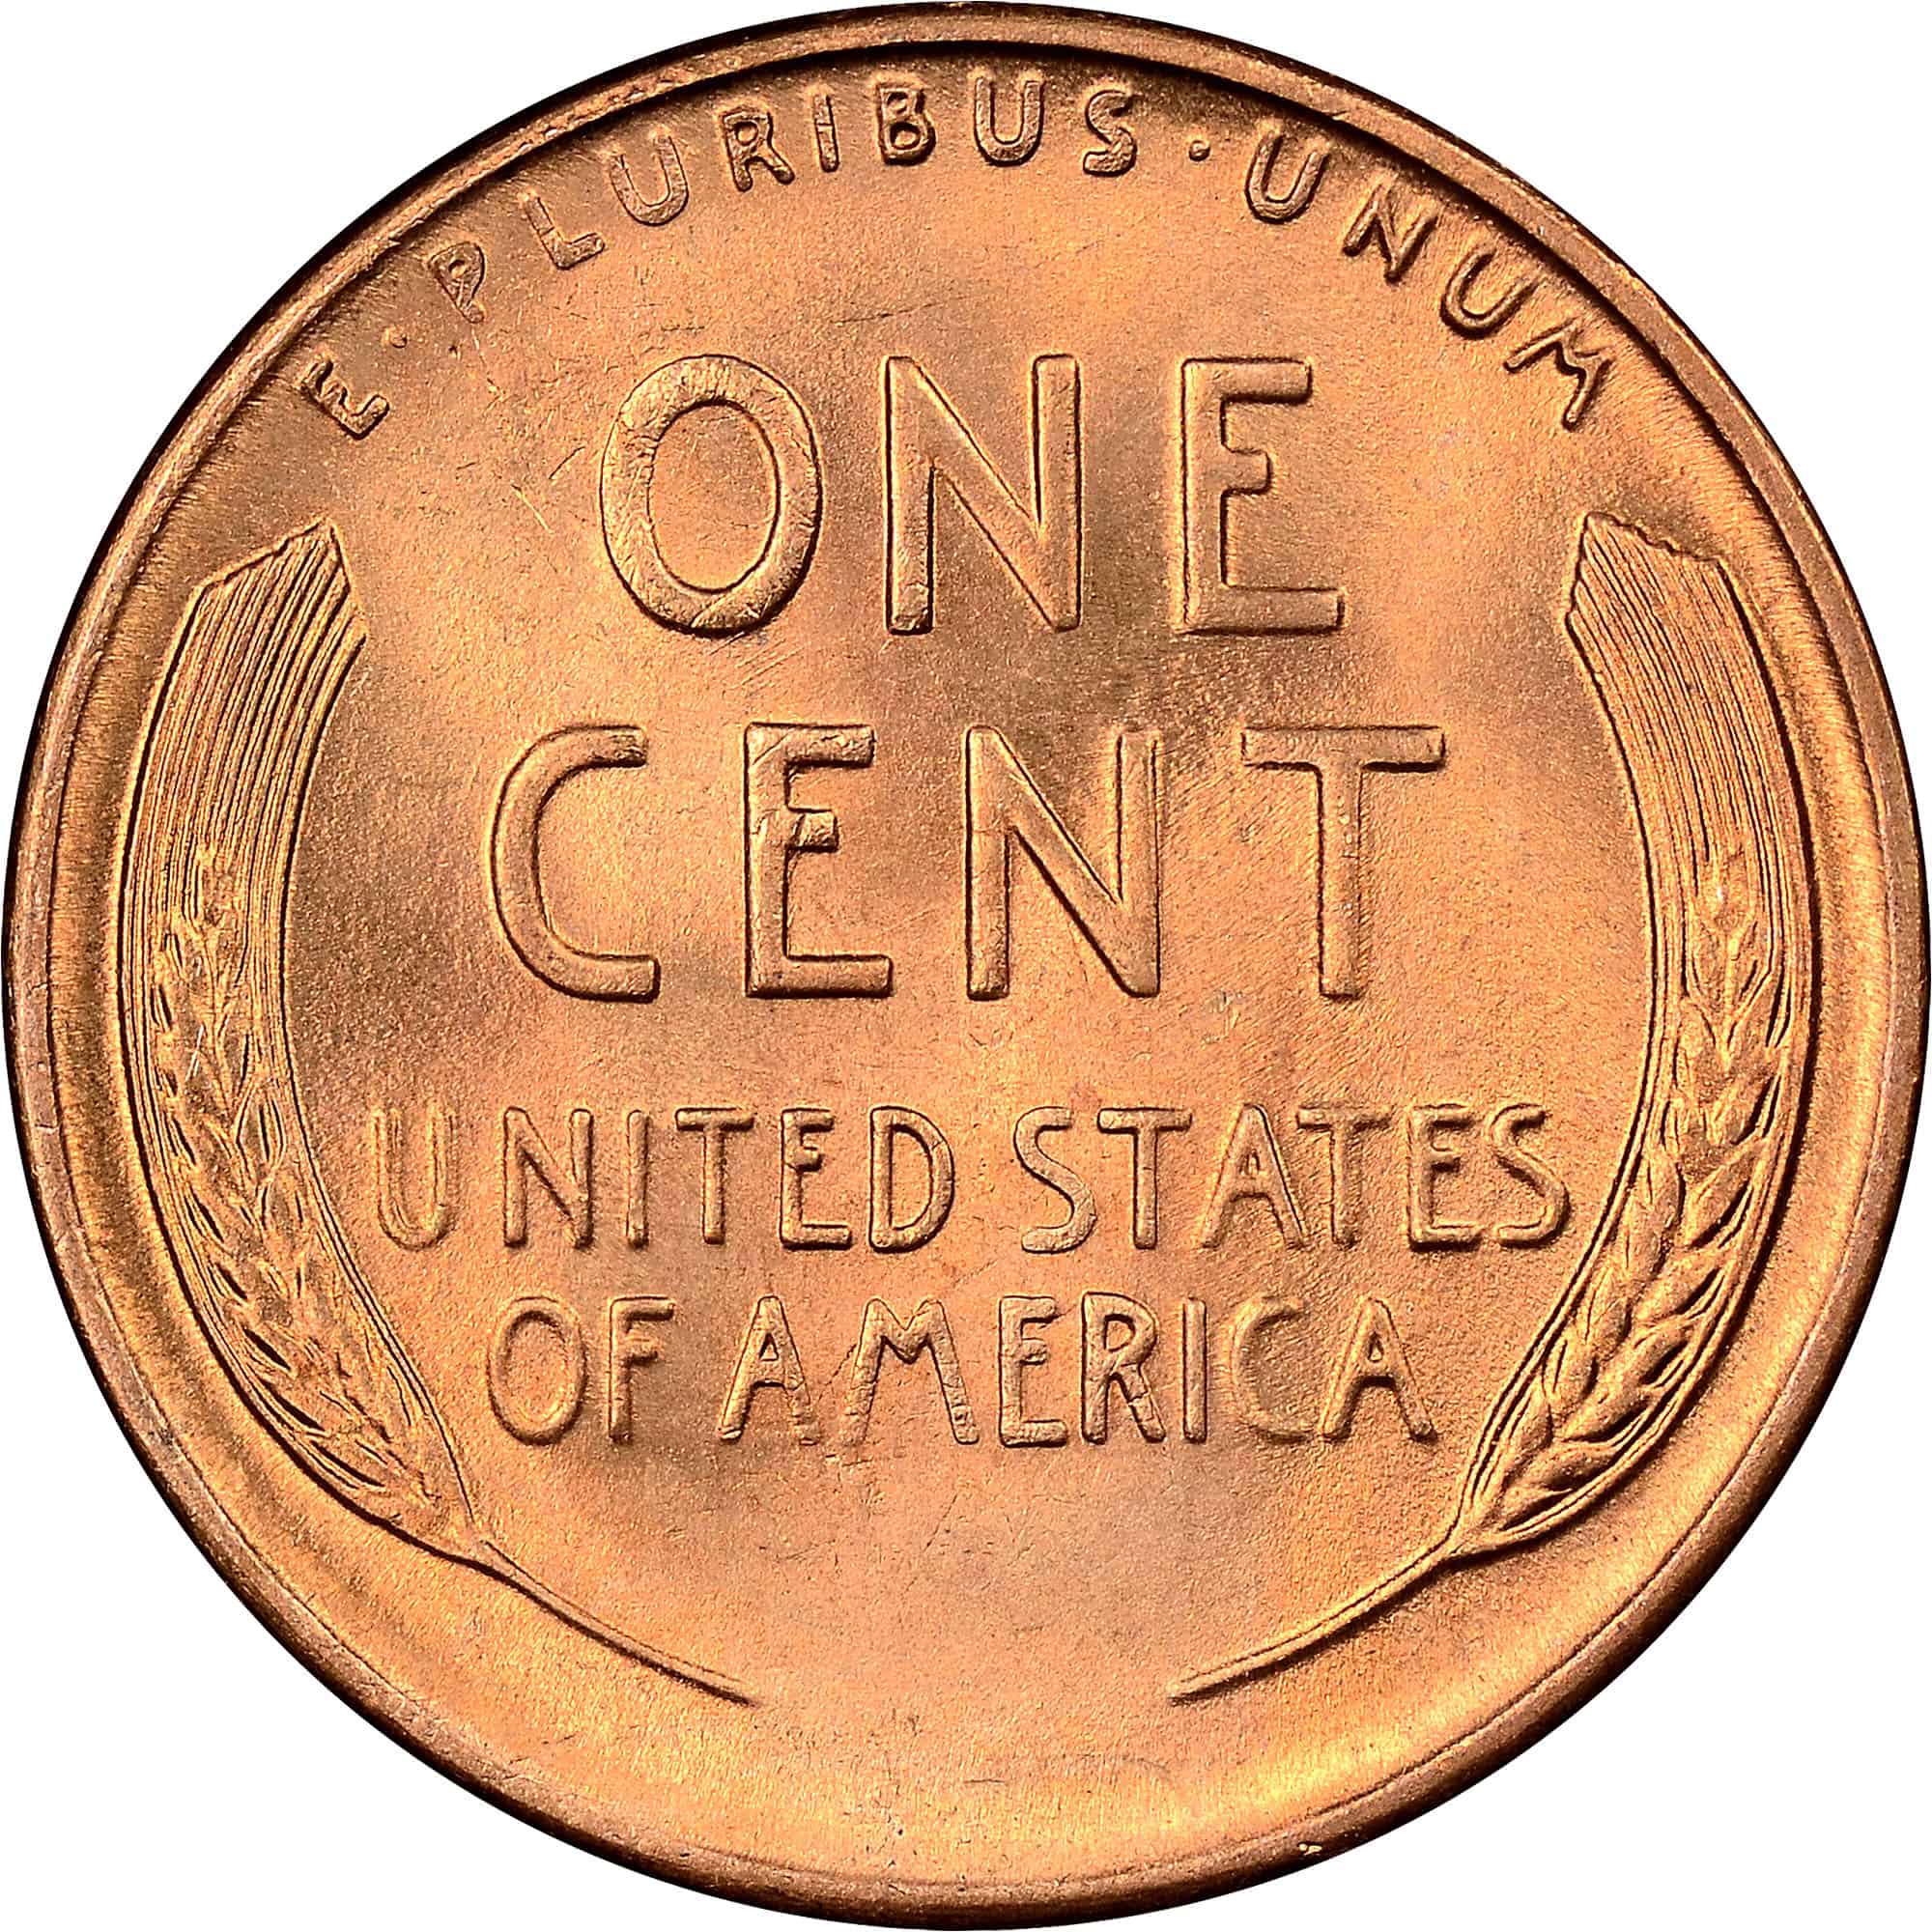 The Reverse of the 1944-S Wheat Penny